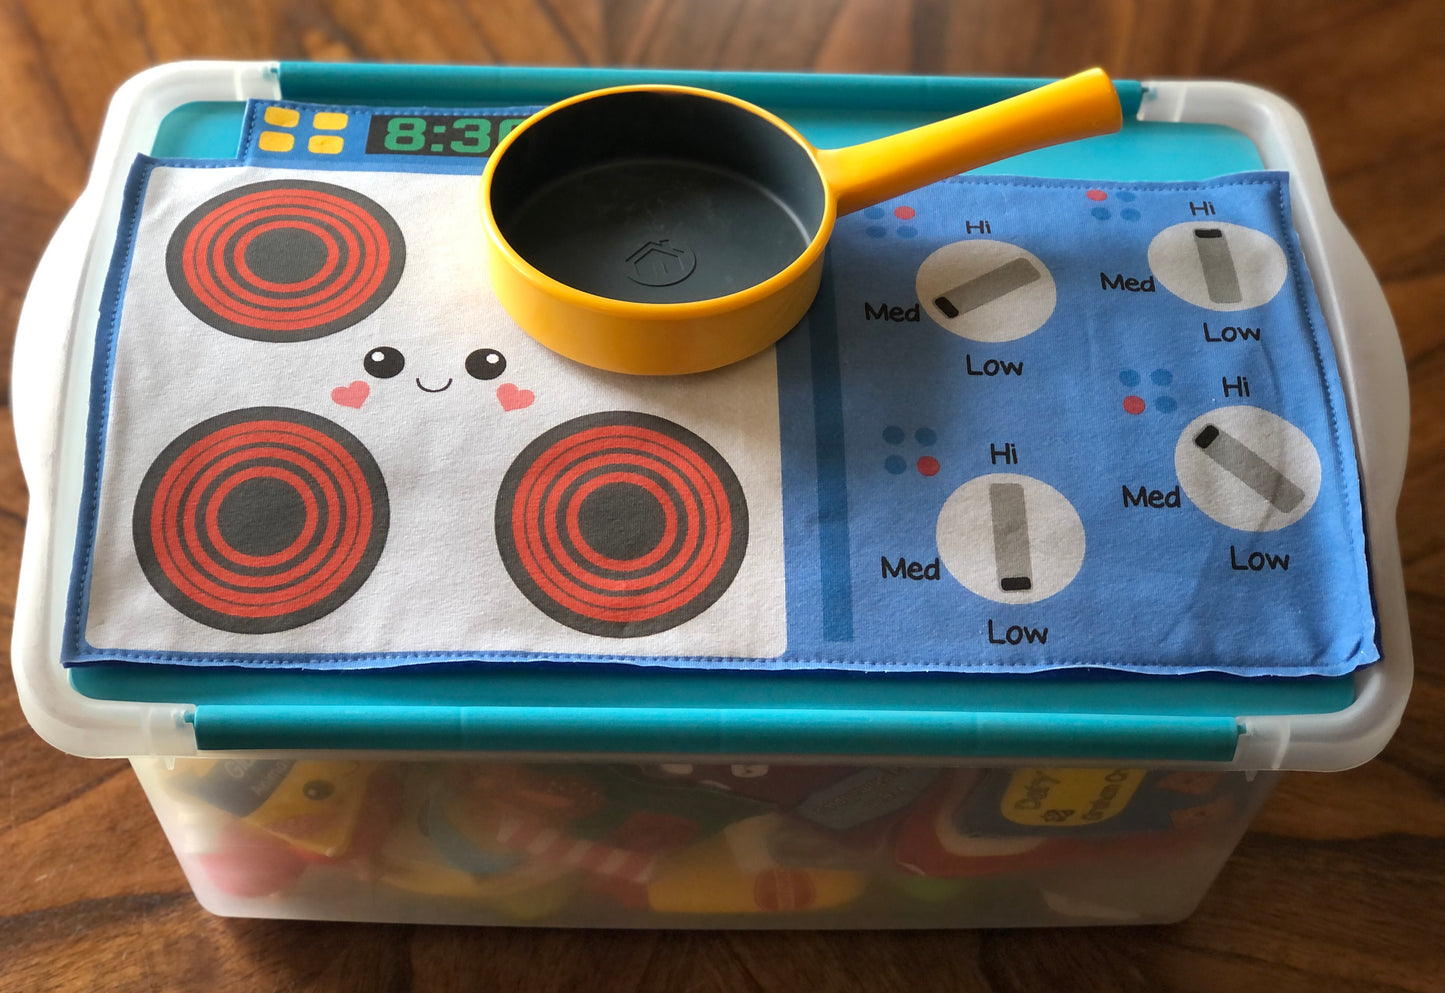 On The Go Stovetop play mat panel